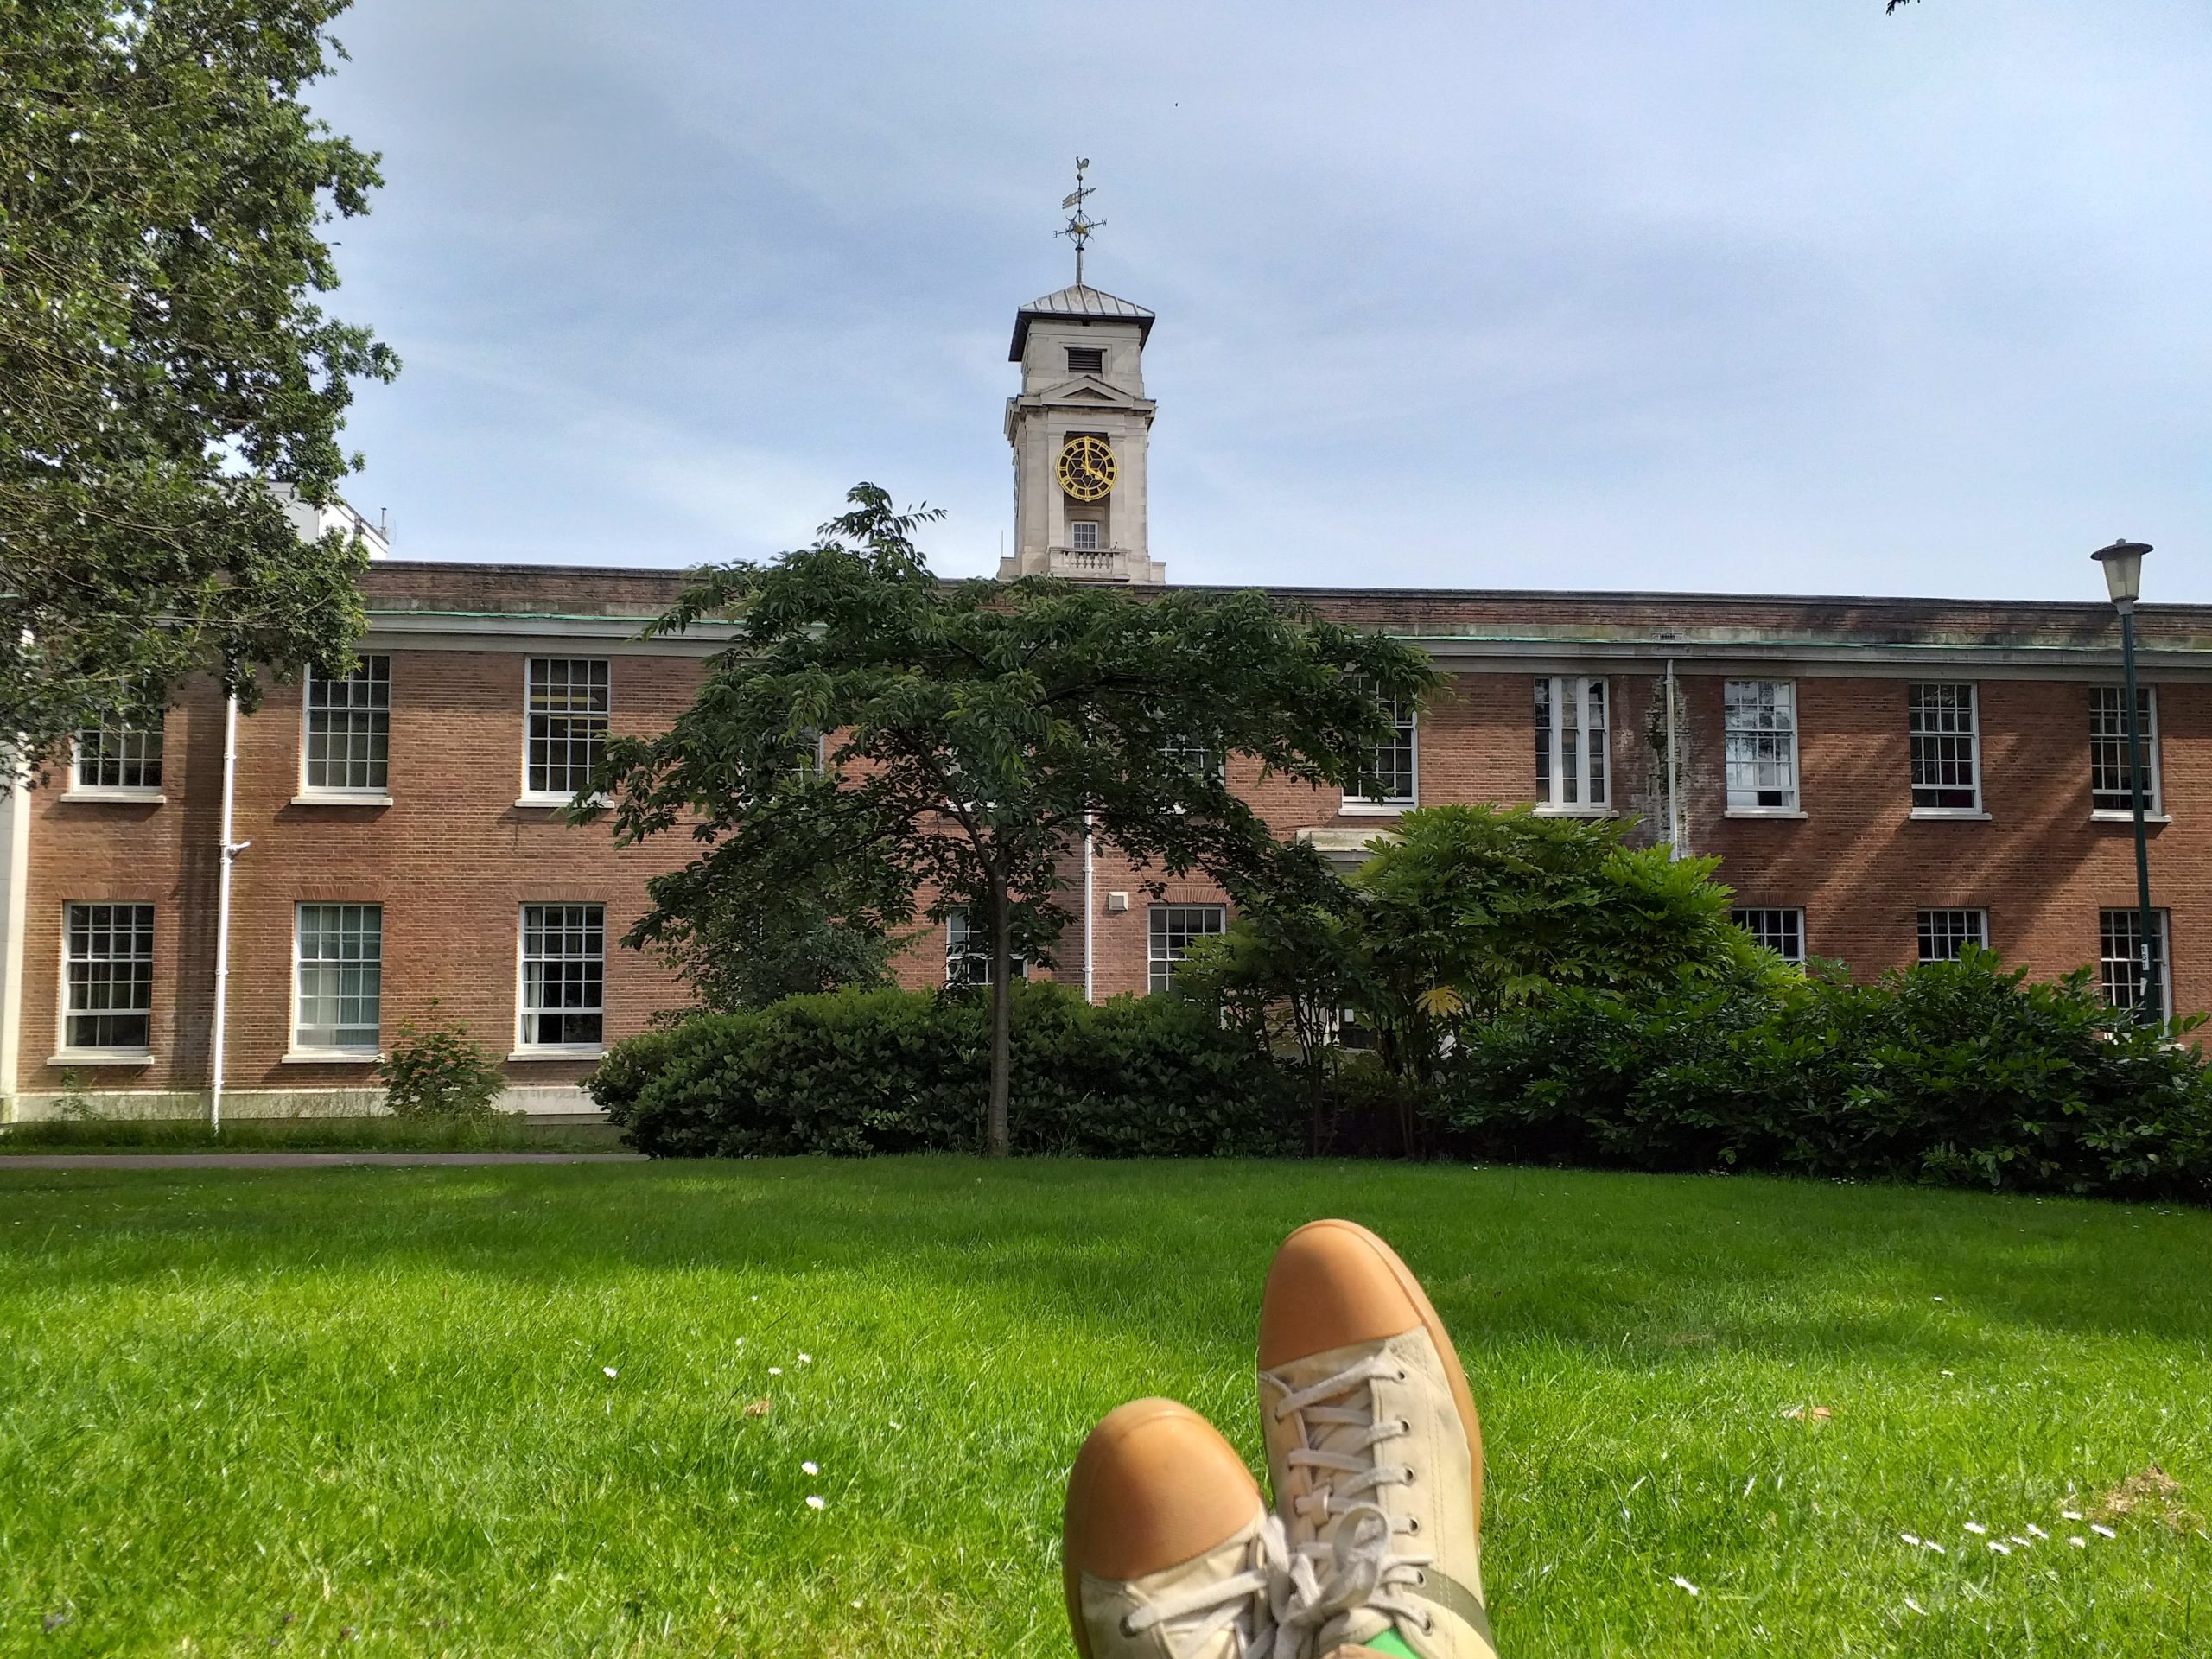 Relaxing on campus with a book!